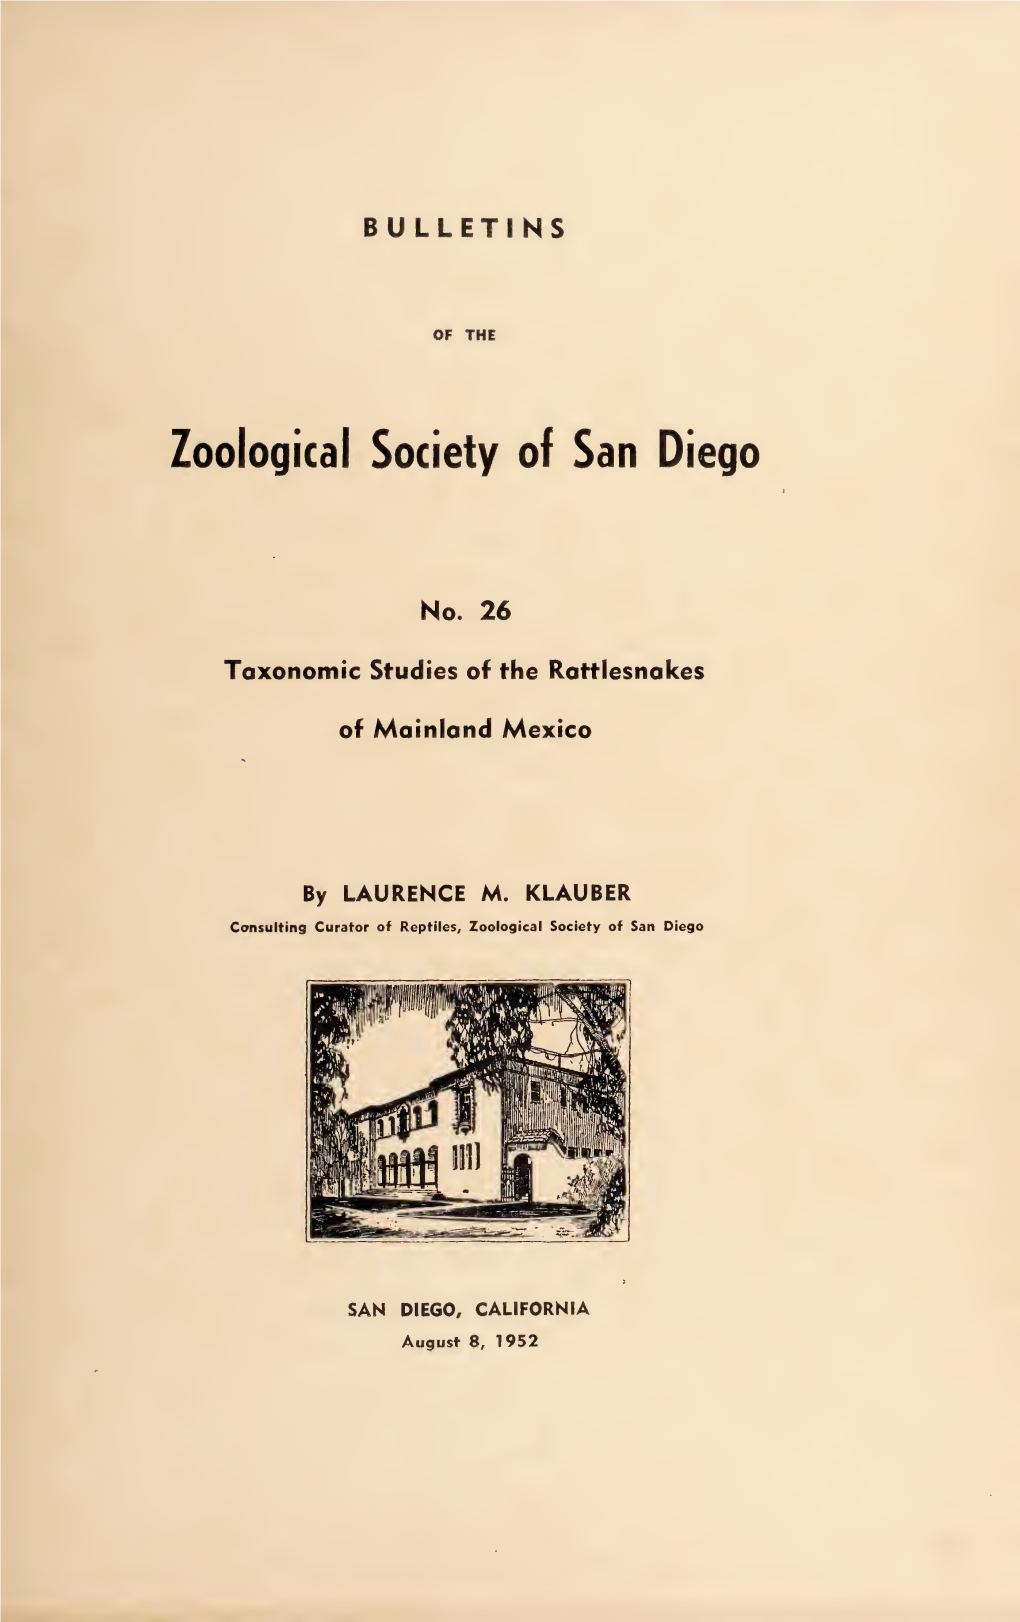 Bulletins of the Zoological Society of San Diego